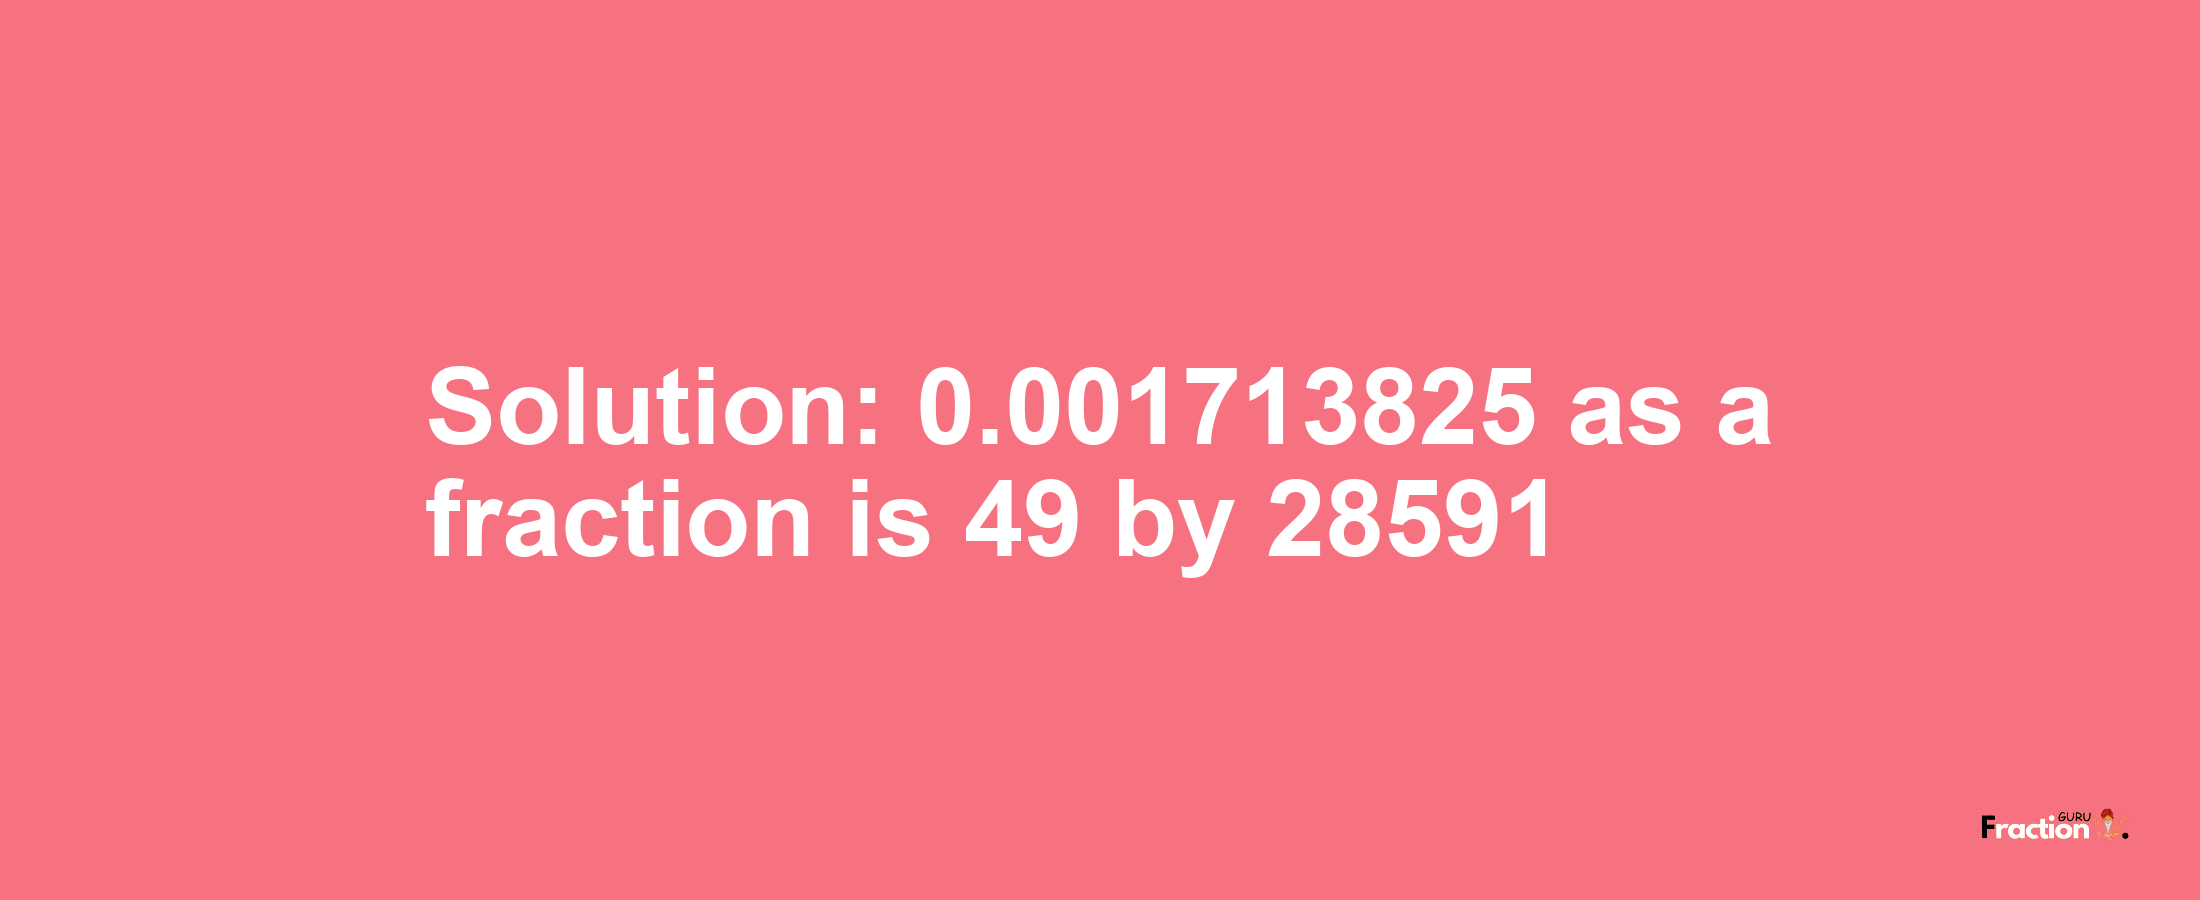 Solution:0.001713825 as a fraction is 49/28591